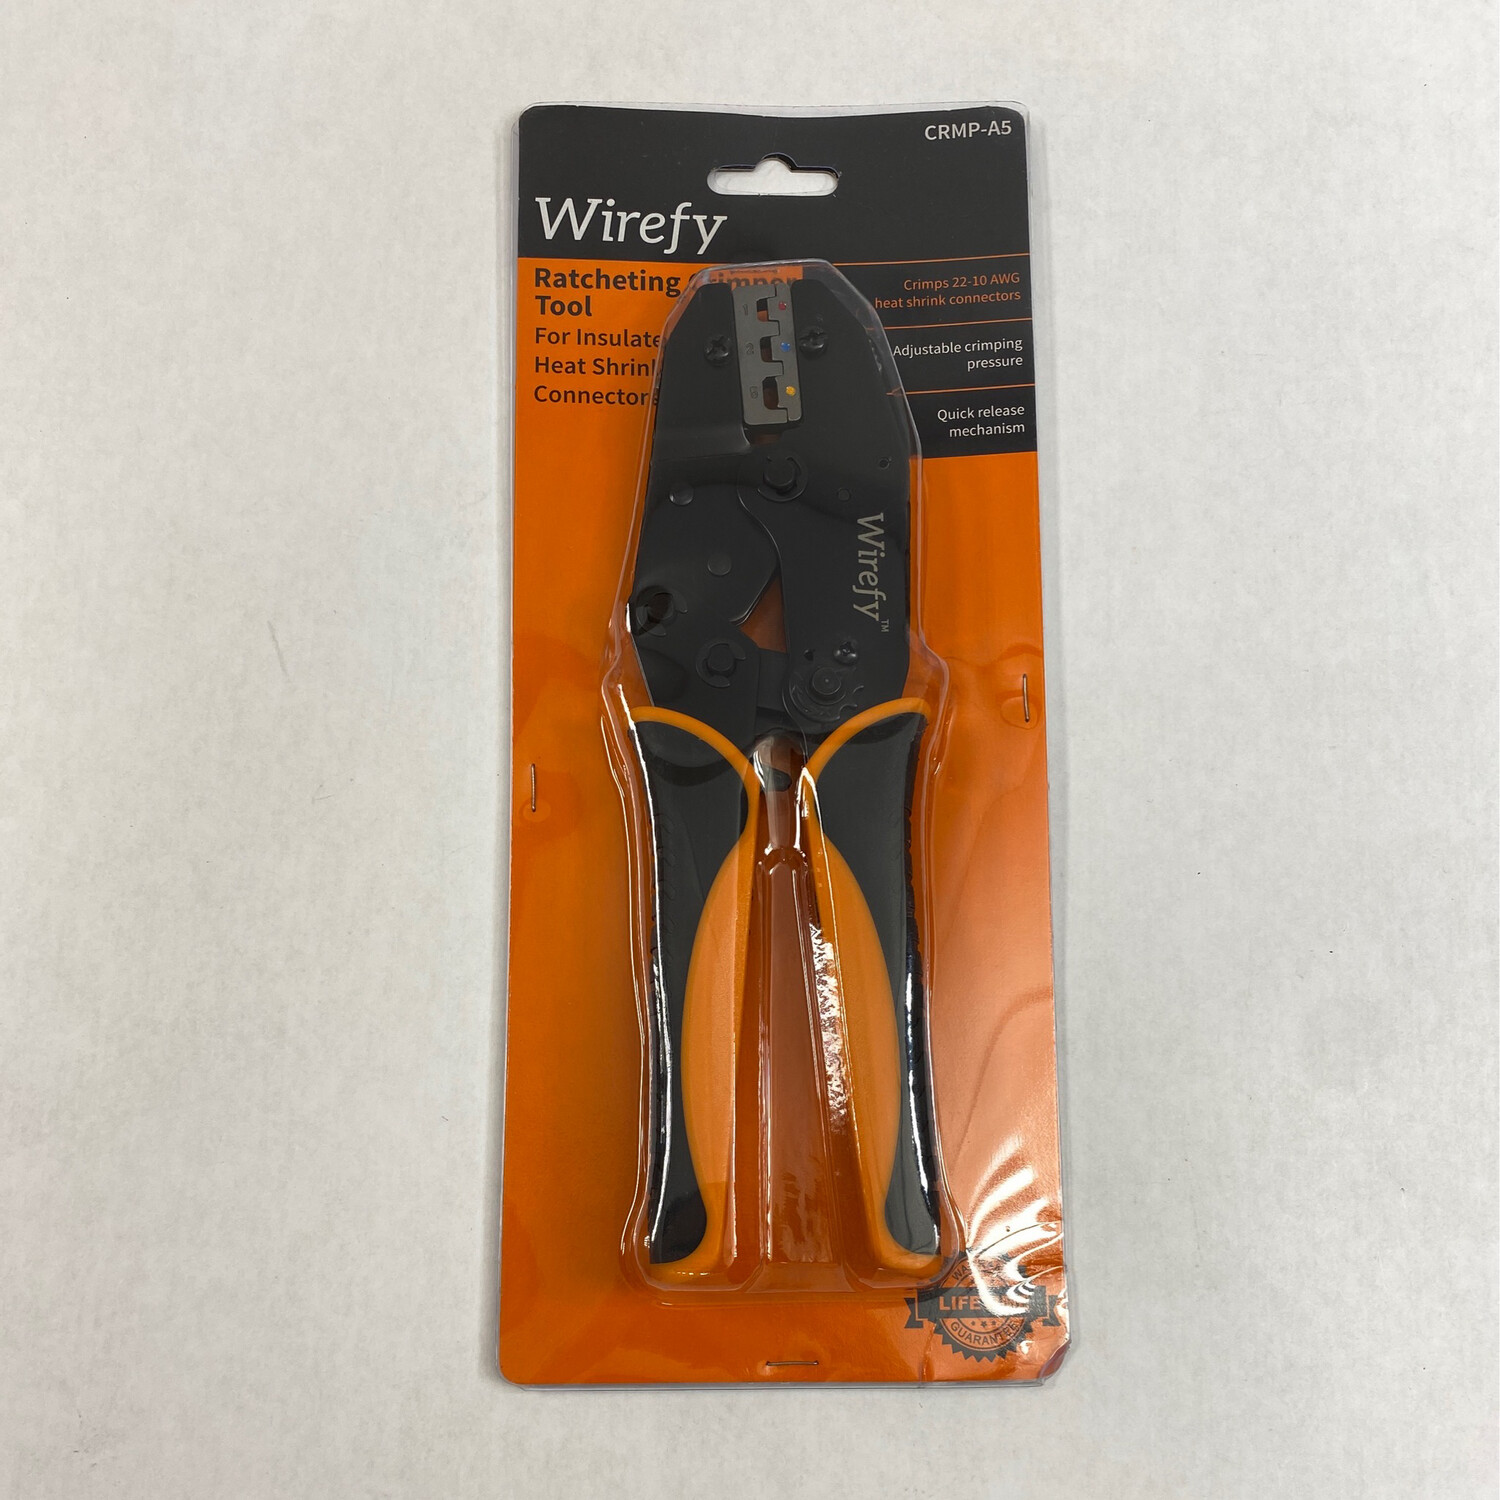 Wirefy Ratcheting Crimper Tool, CRMP-A5